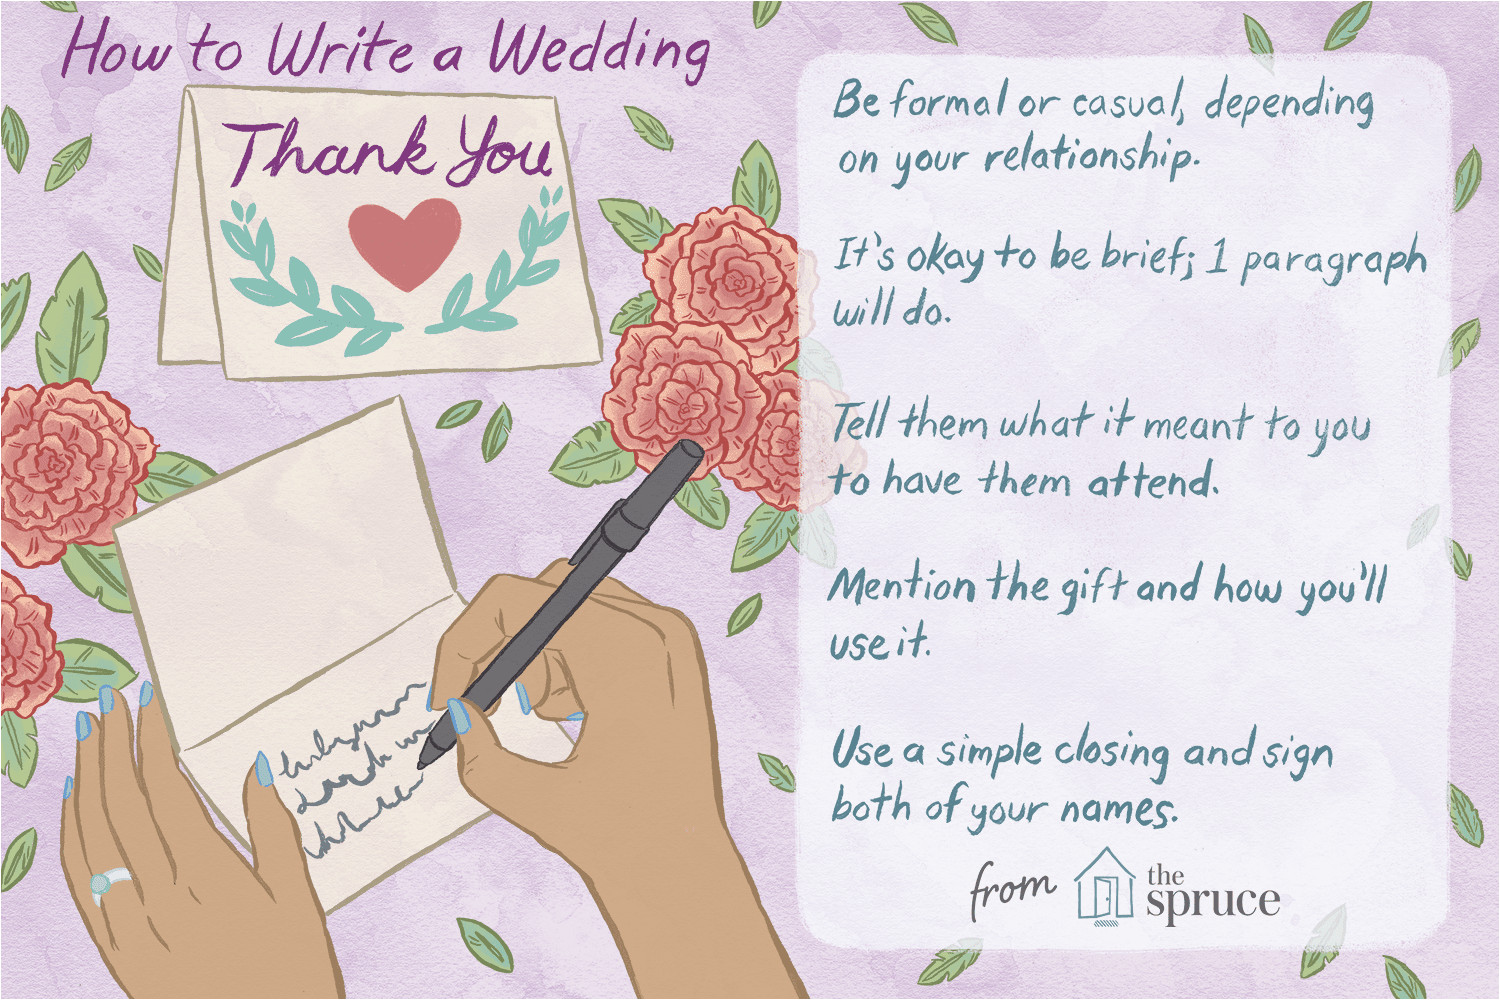 Thank You Card Etiquette Wedding Wedding Thank You Note Wording Examples